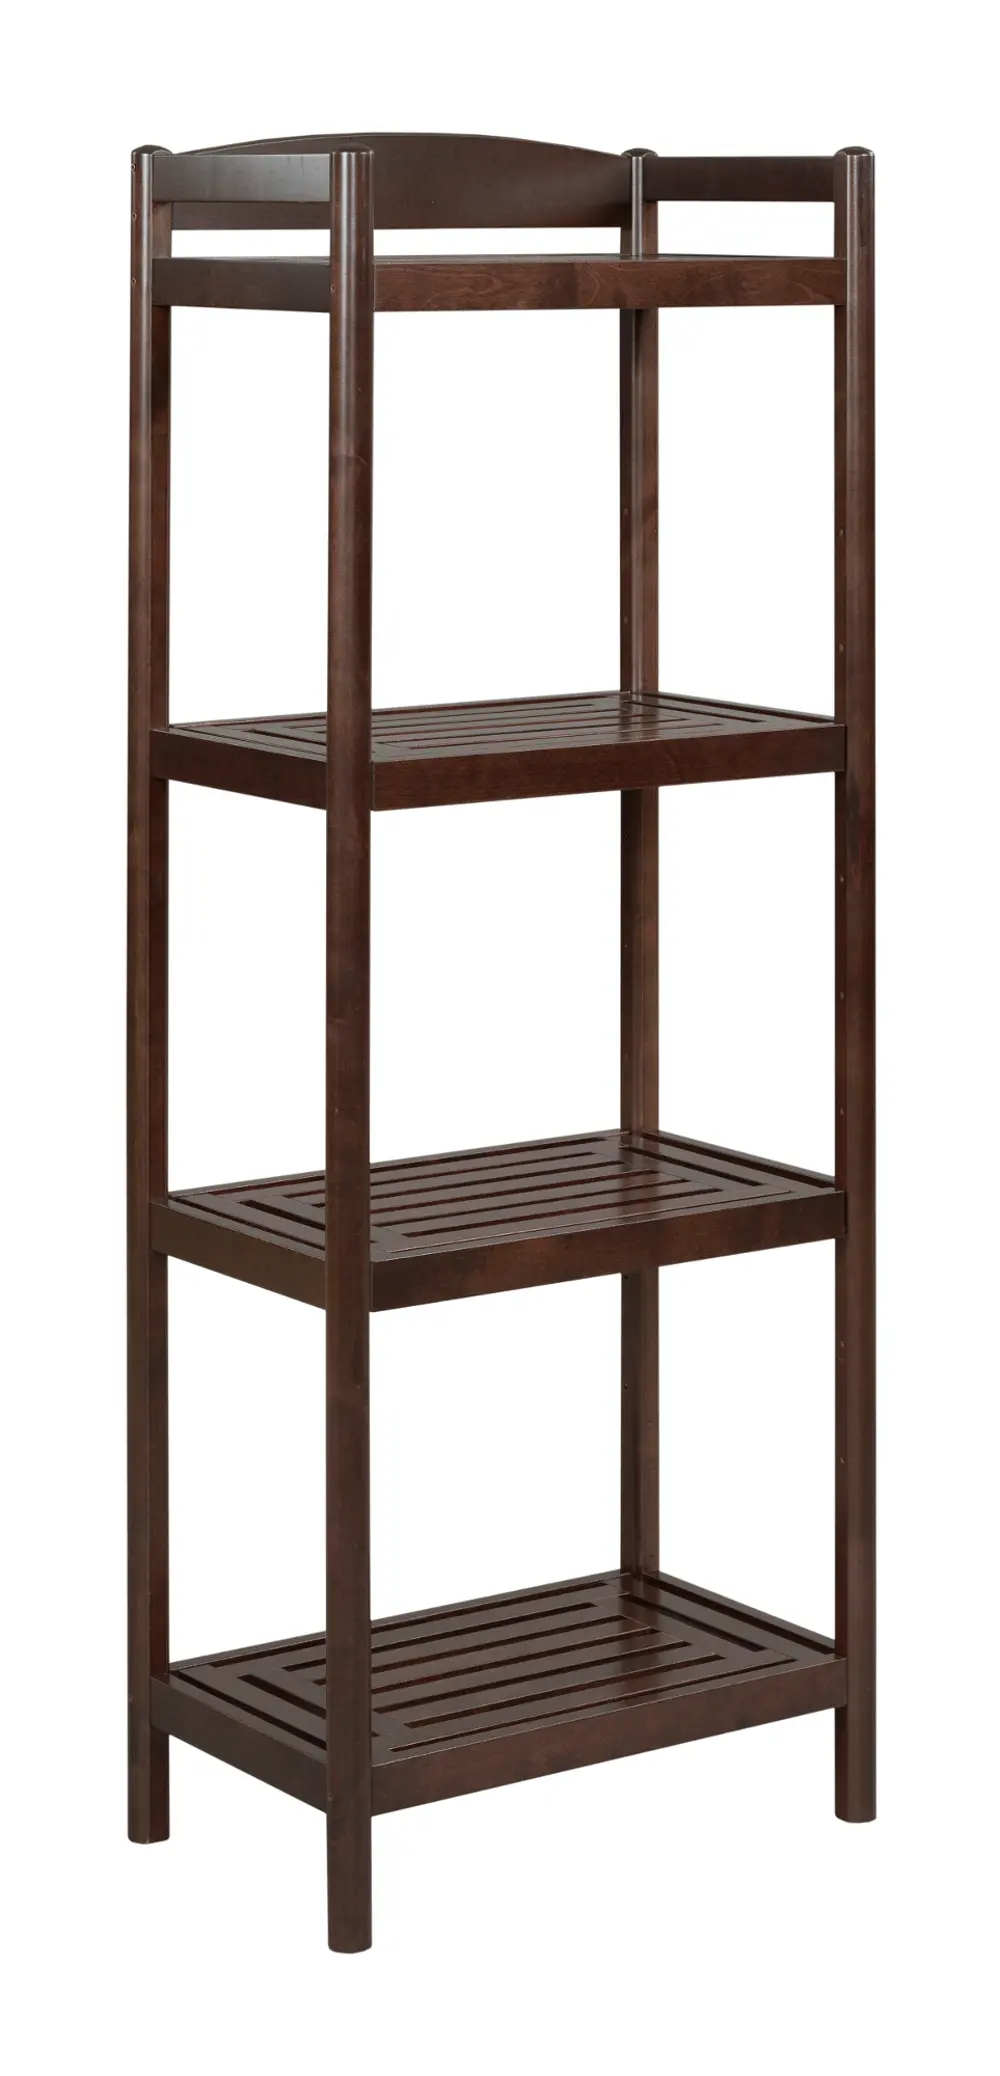 Adjustable Merlot Wooden Tall Bookcase / Media Tower - Exmore-1